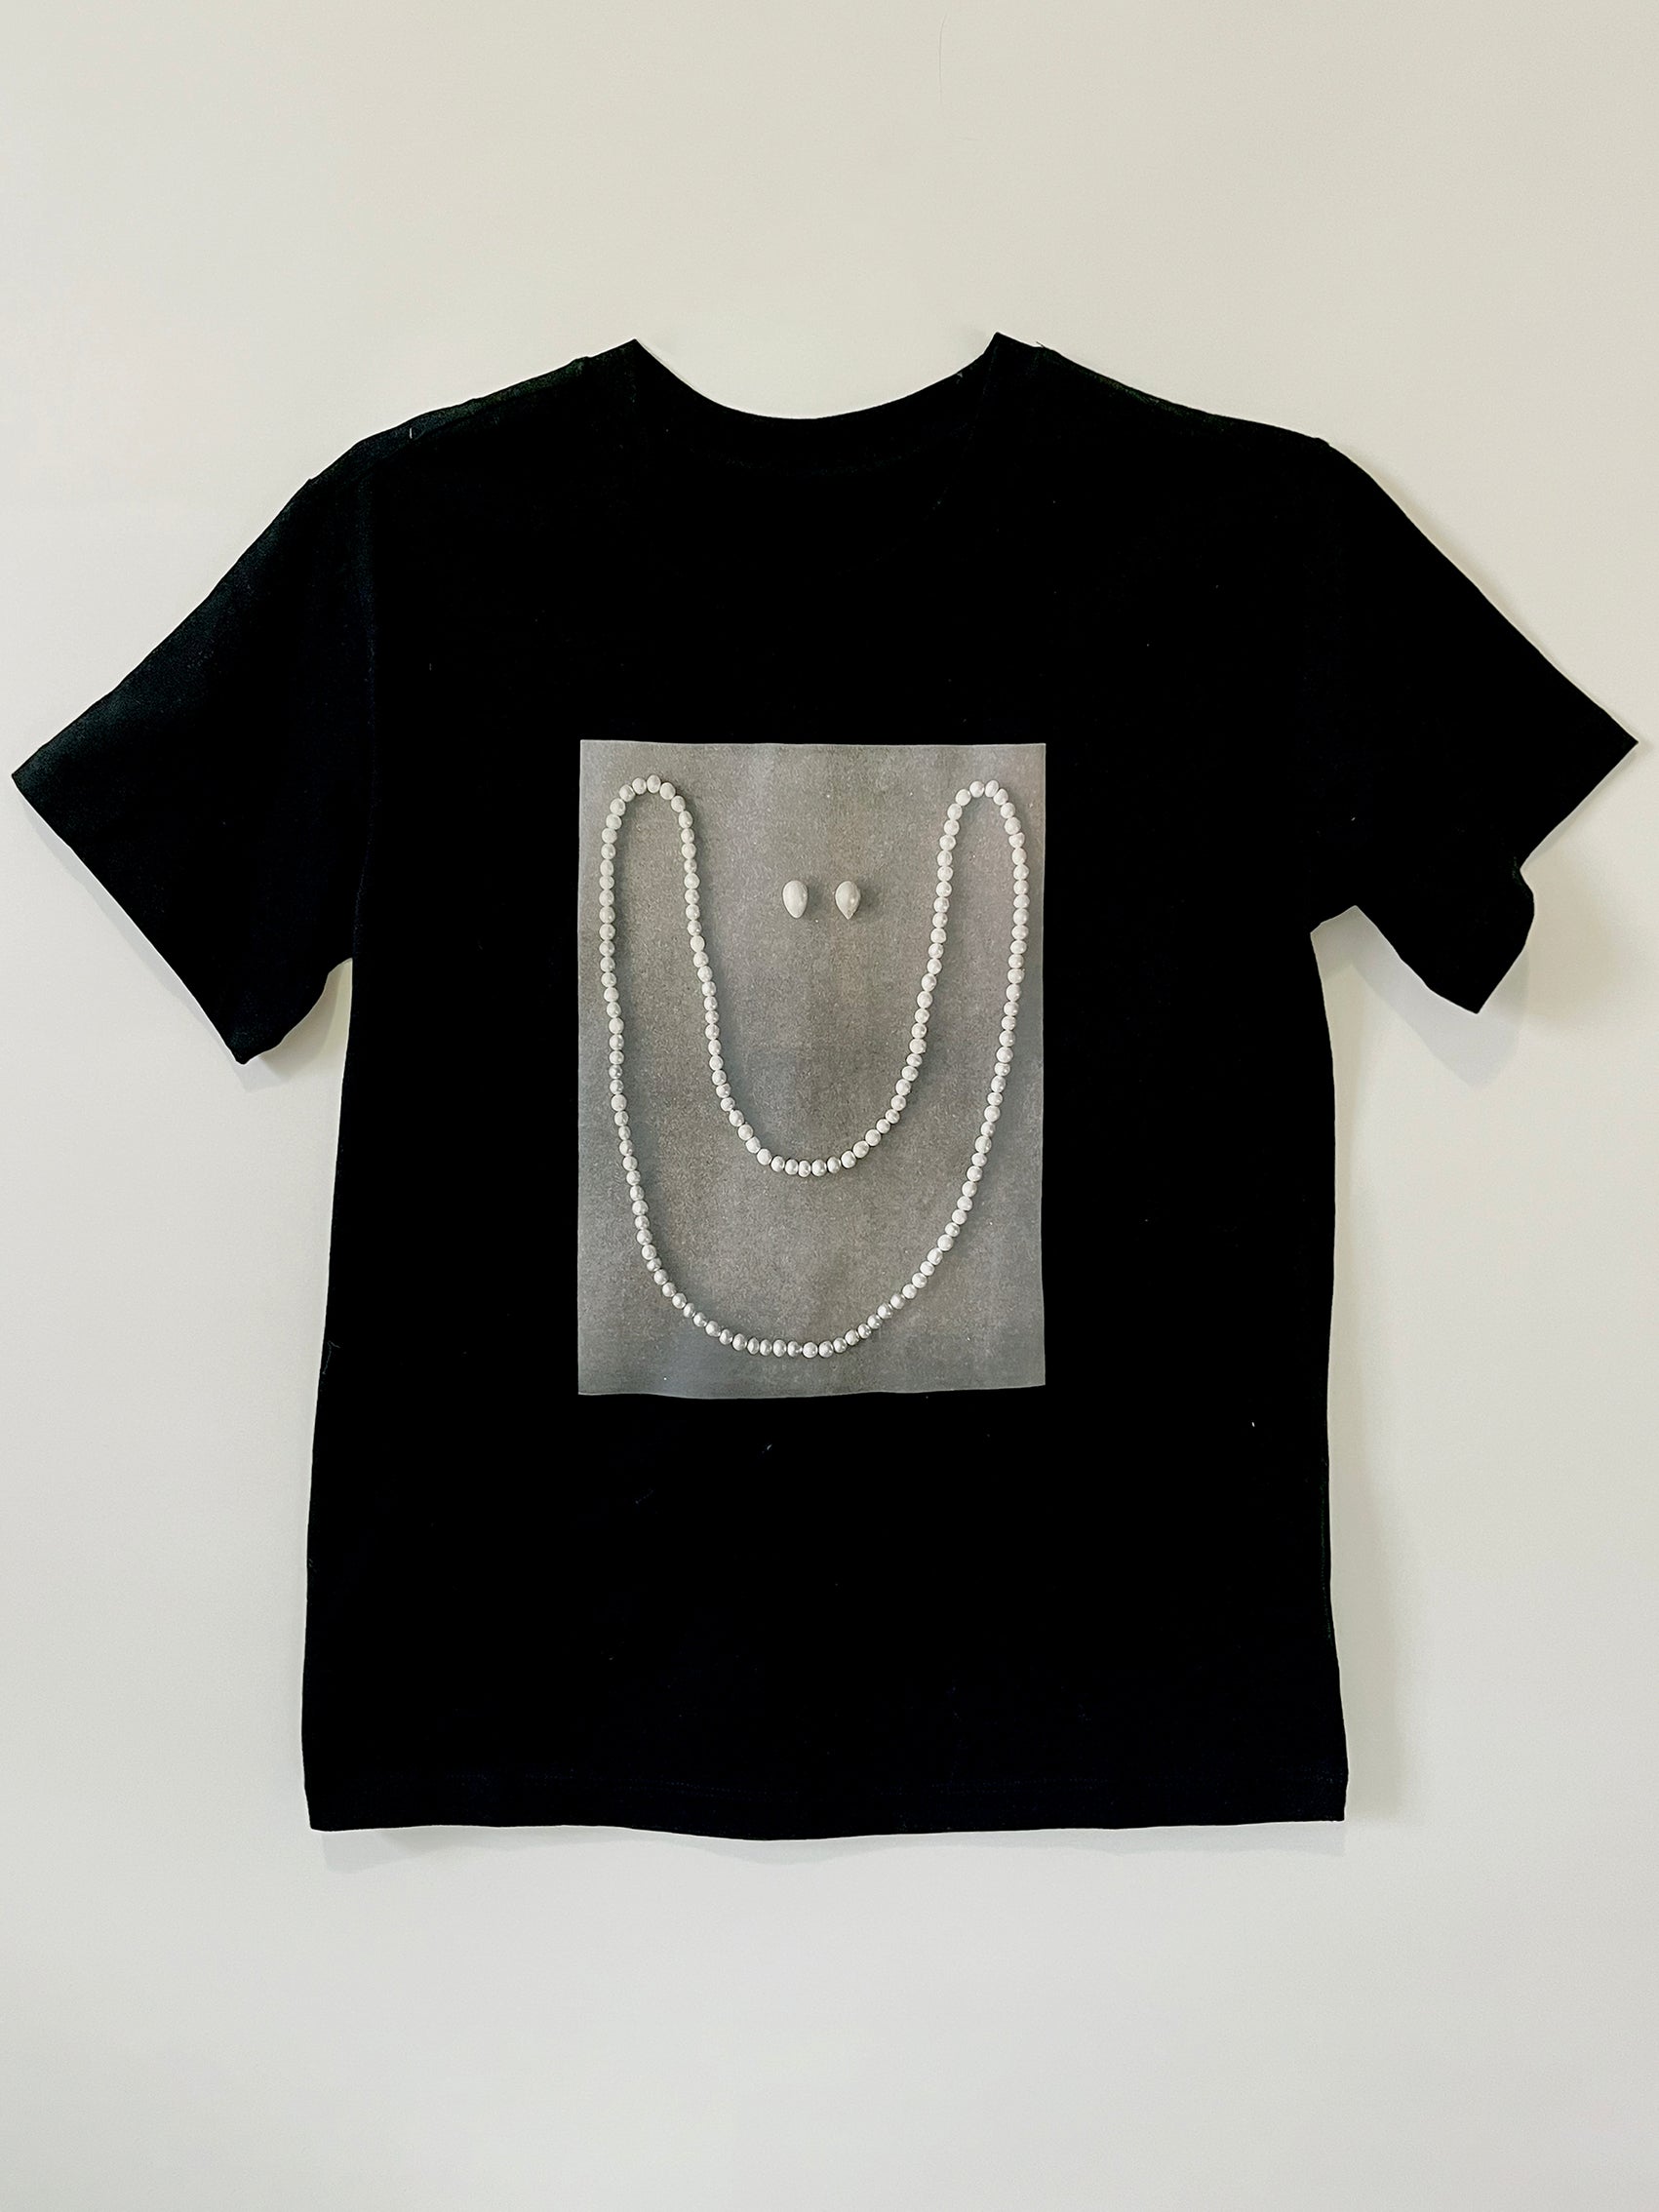  Product photo of Happy As A Clam tee by CLARK. A graphic custom-made black straight-cut shirt featuring a smile made out of pearls. It is an artist made to order item, available in s/m and l/xl.